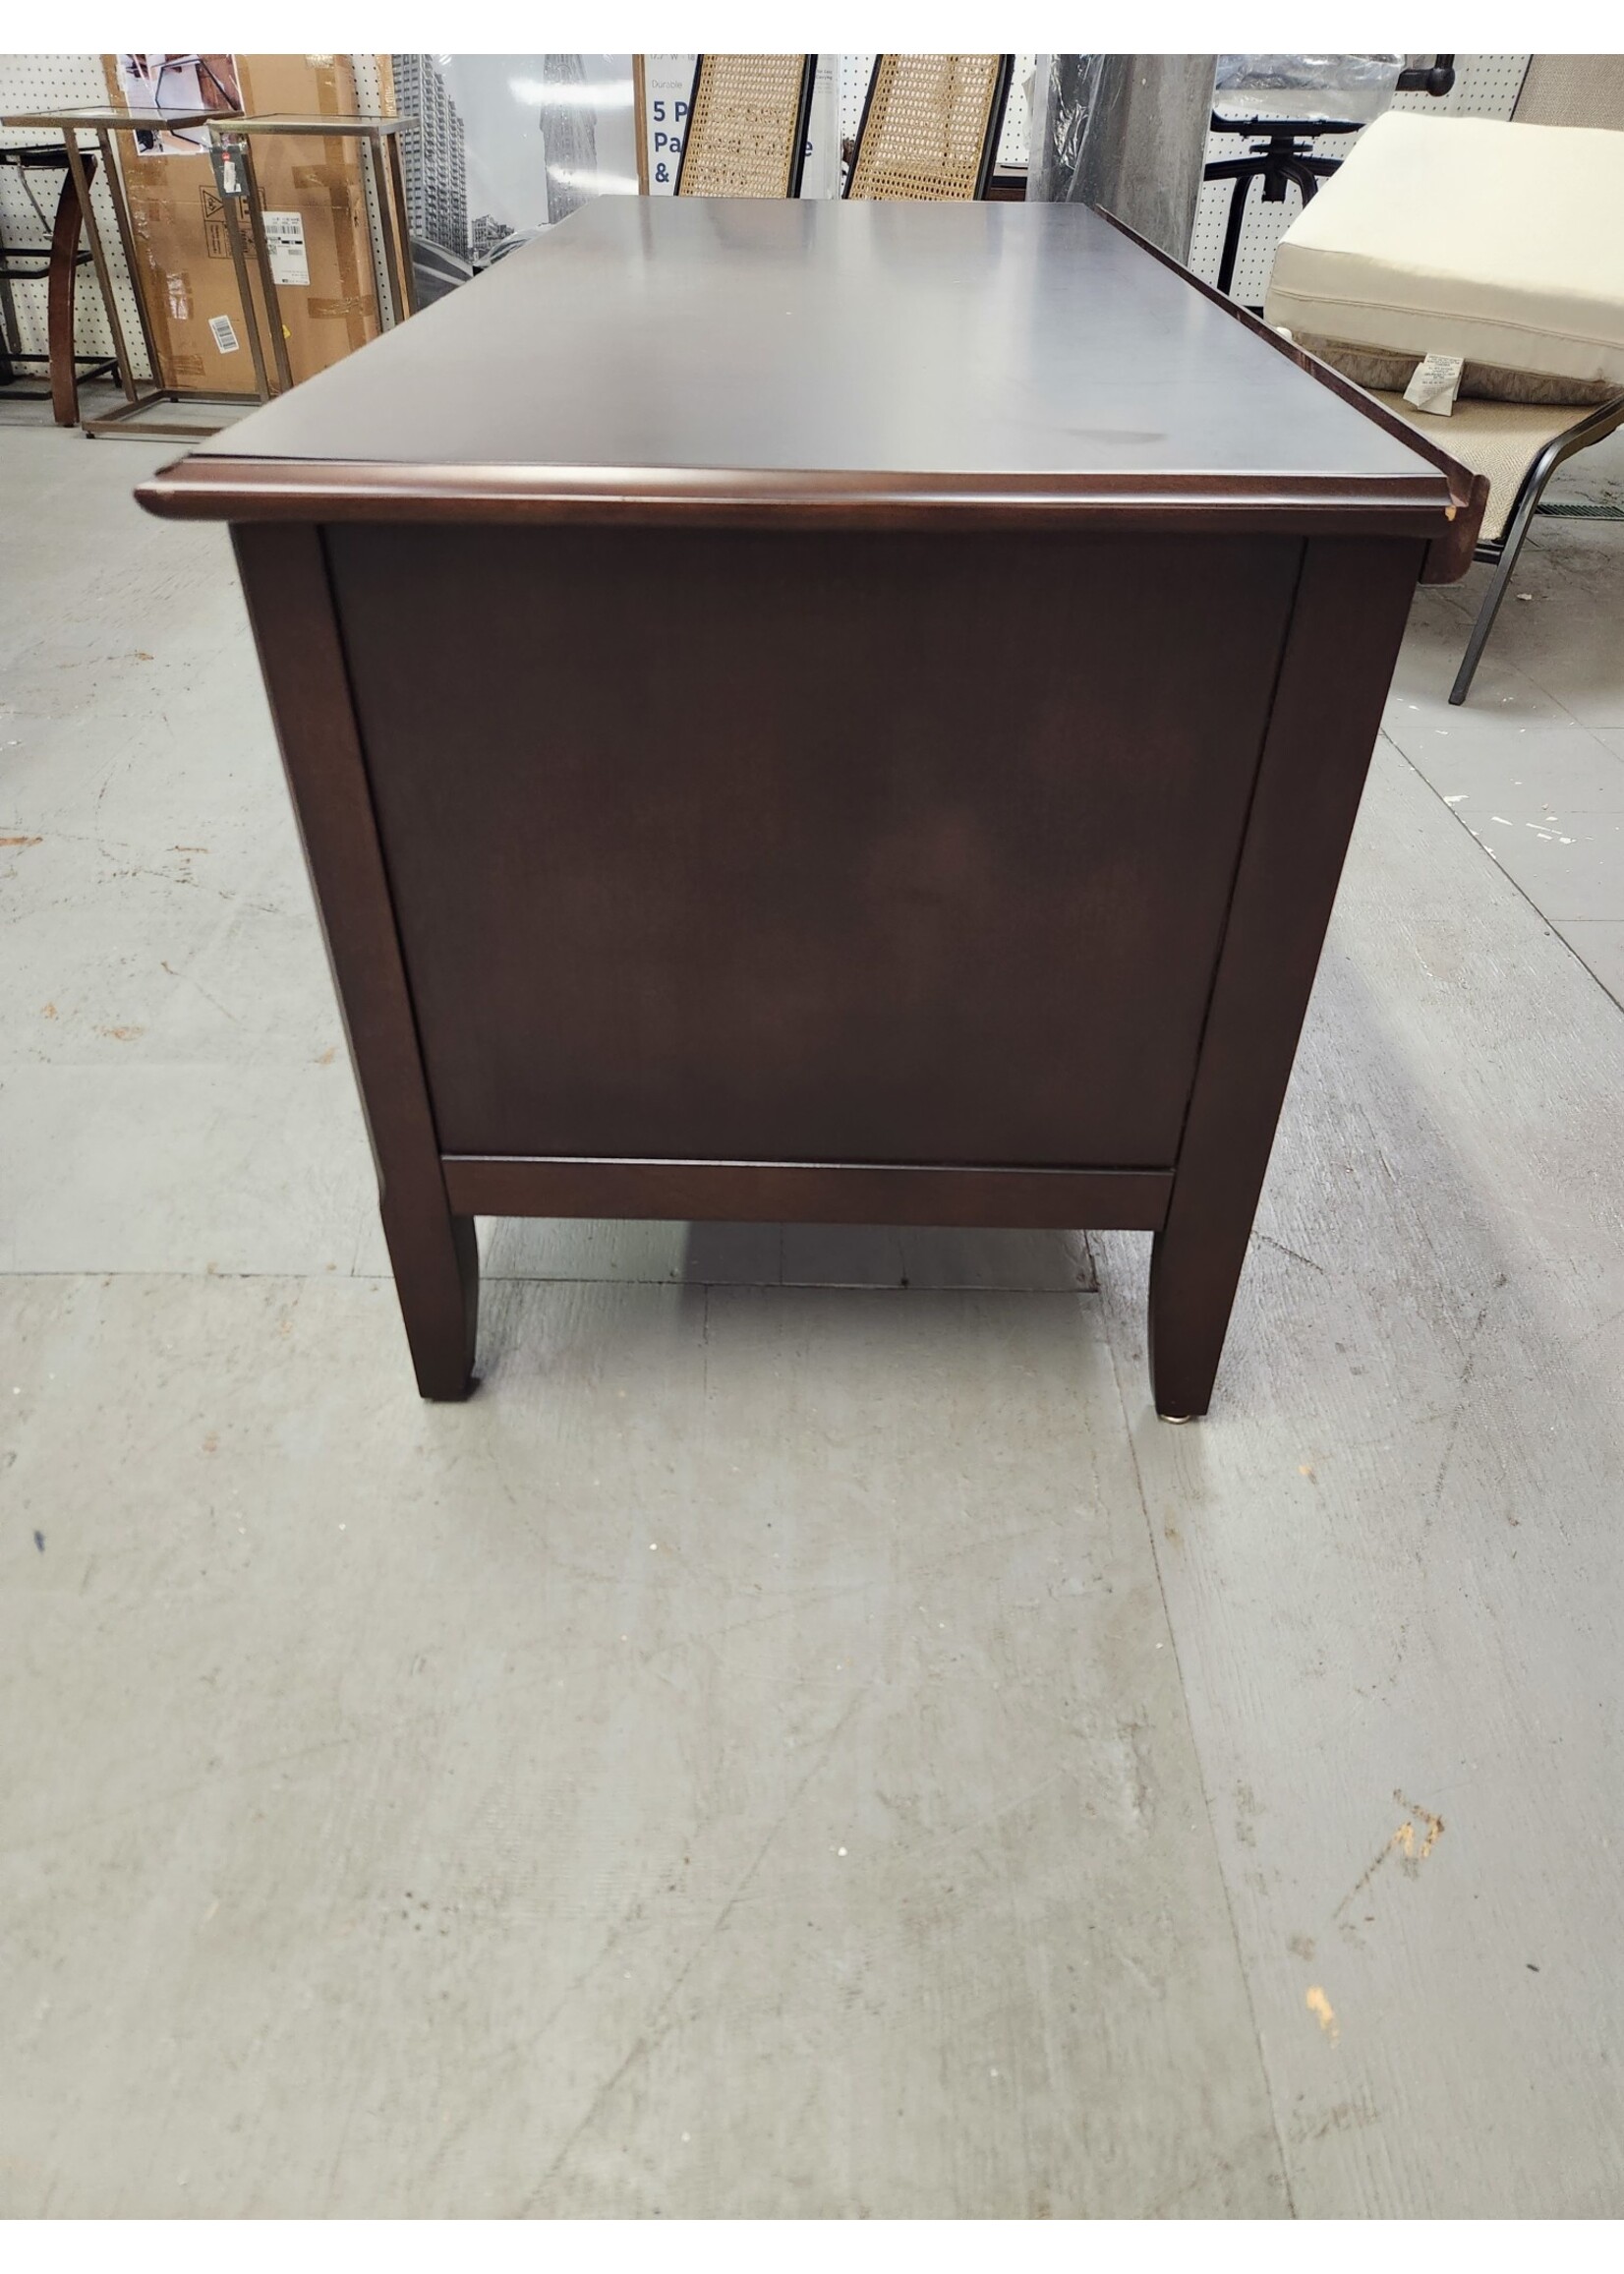 *Slight Imperfections 57Wx25.75Hx25D Bassett Furniture John Elway Collection Media Cabinet TV Stand